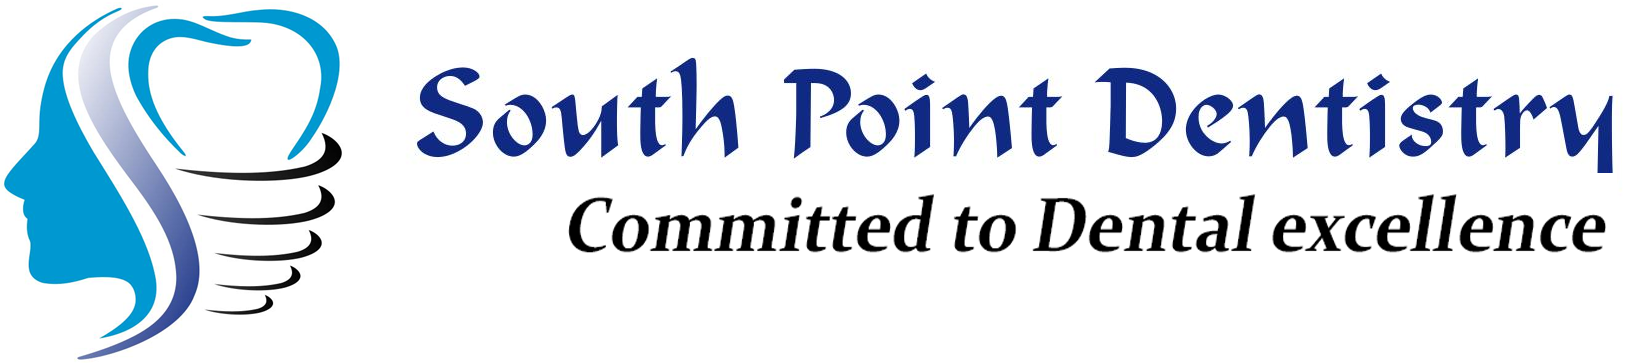 South Point Dentistry|Diagnostic centre|Medical Services